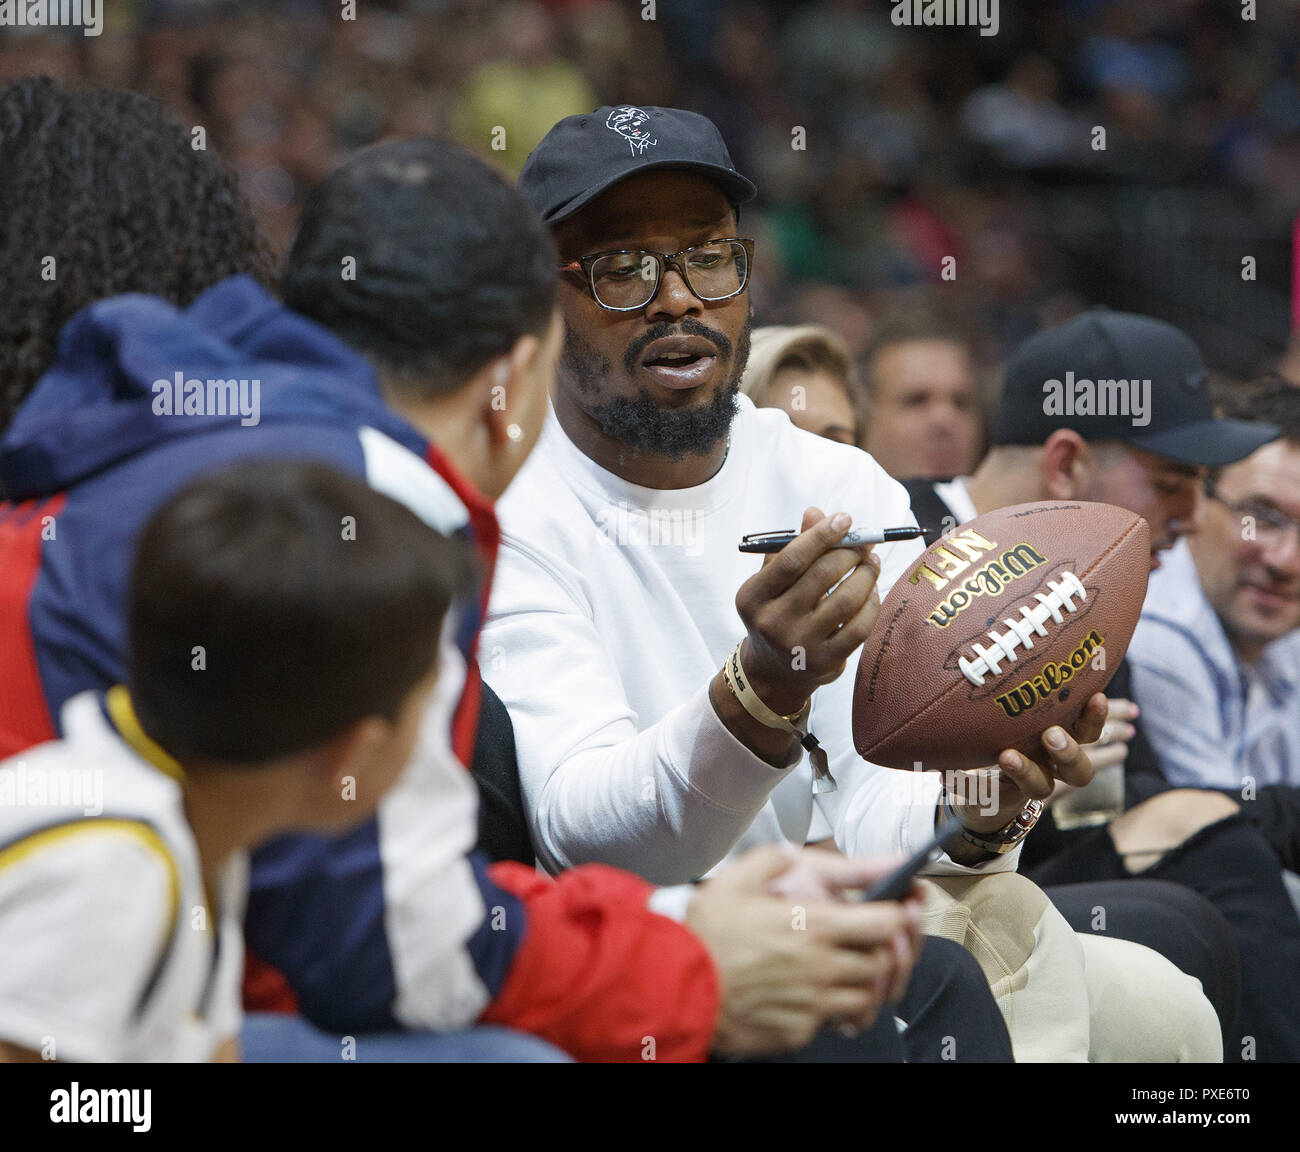 Denver, Colorado, USA. 21st Oct, 2018. Denver Broncos OLB VON MILLER, signs a football with team mates for Rocky the mascot to throw into the stands during the 2nd. Half at the Pepsi Center Sunday night. The Nuggets beat the Warriors 100-98. Credit: Hector Acevedo/ZUMA Wire/Alamy Live News Stock Photo